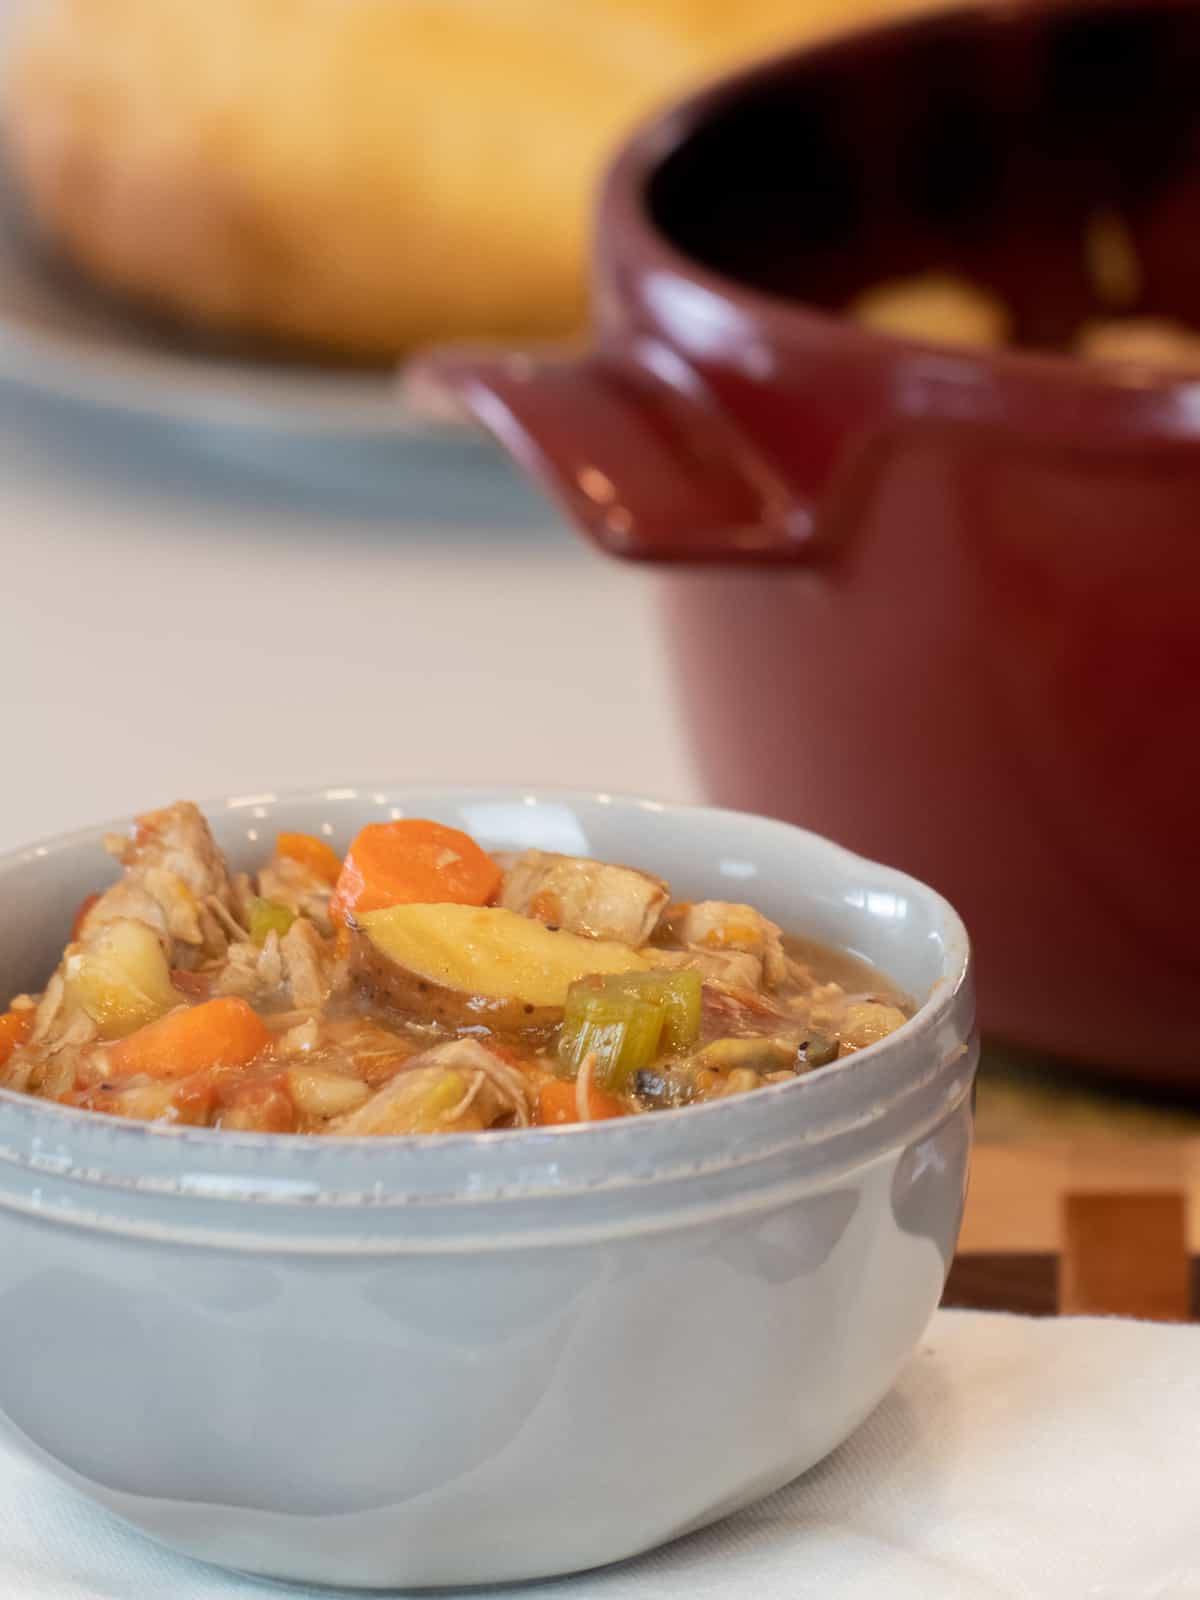 A bowl of stew in front of a red dutch oven.